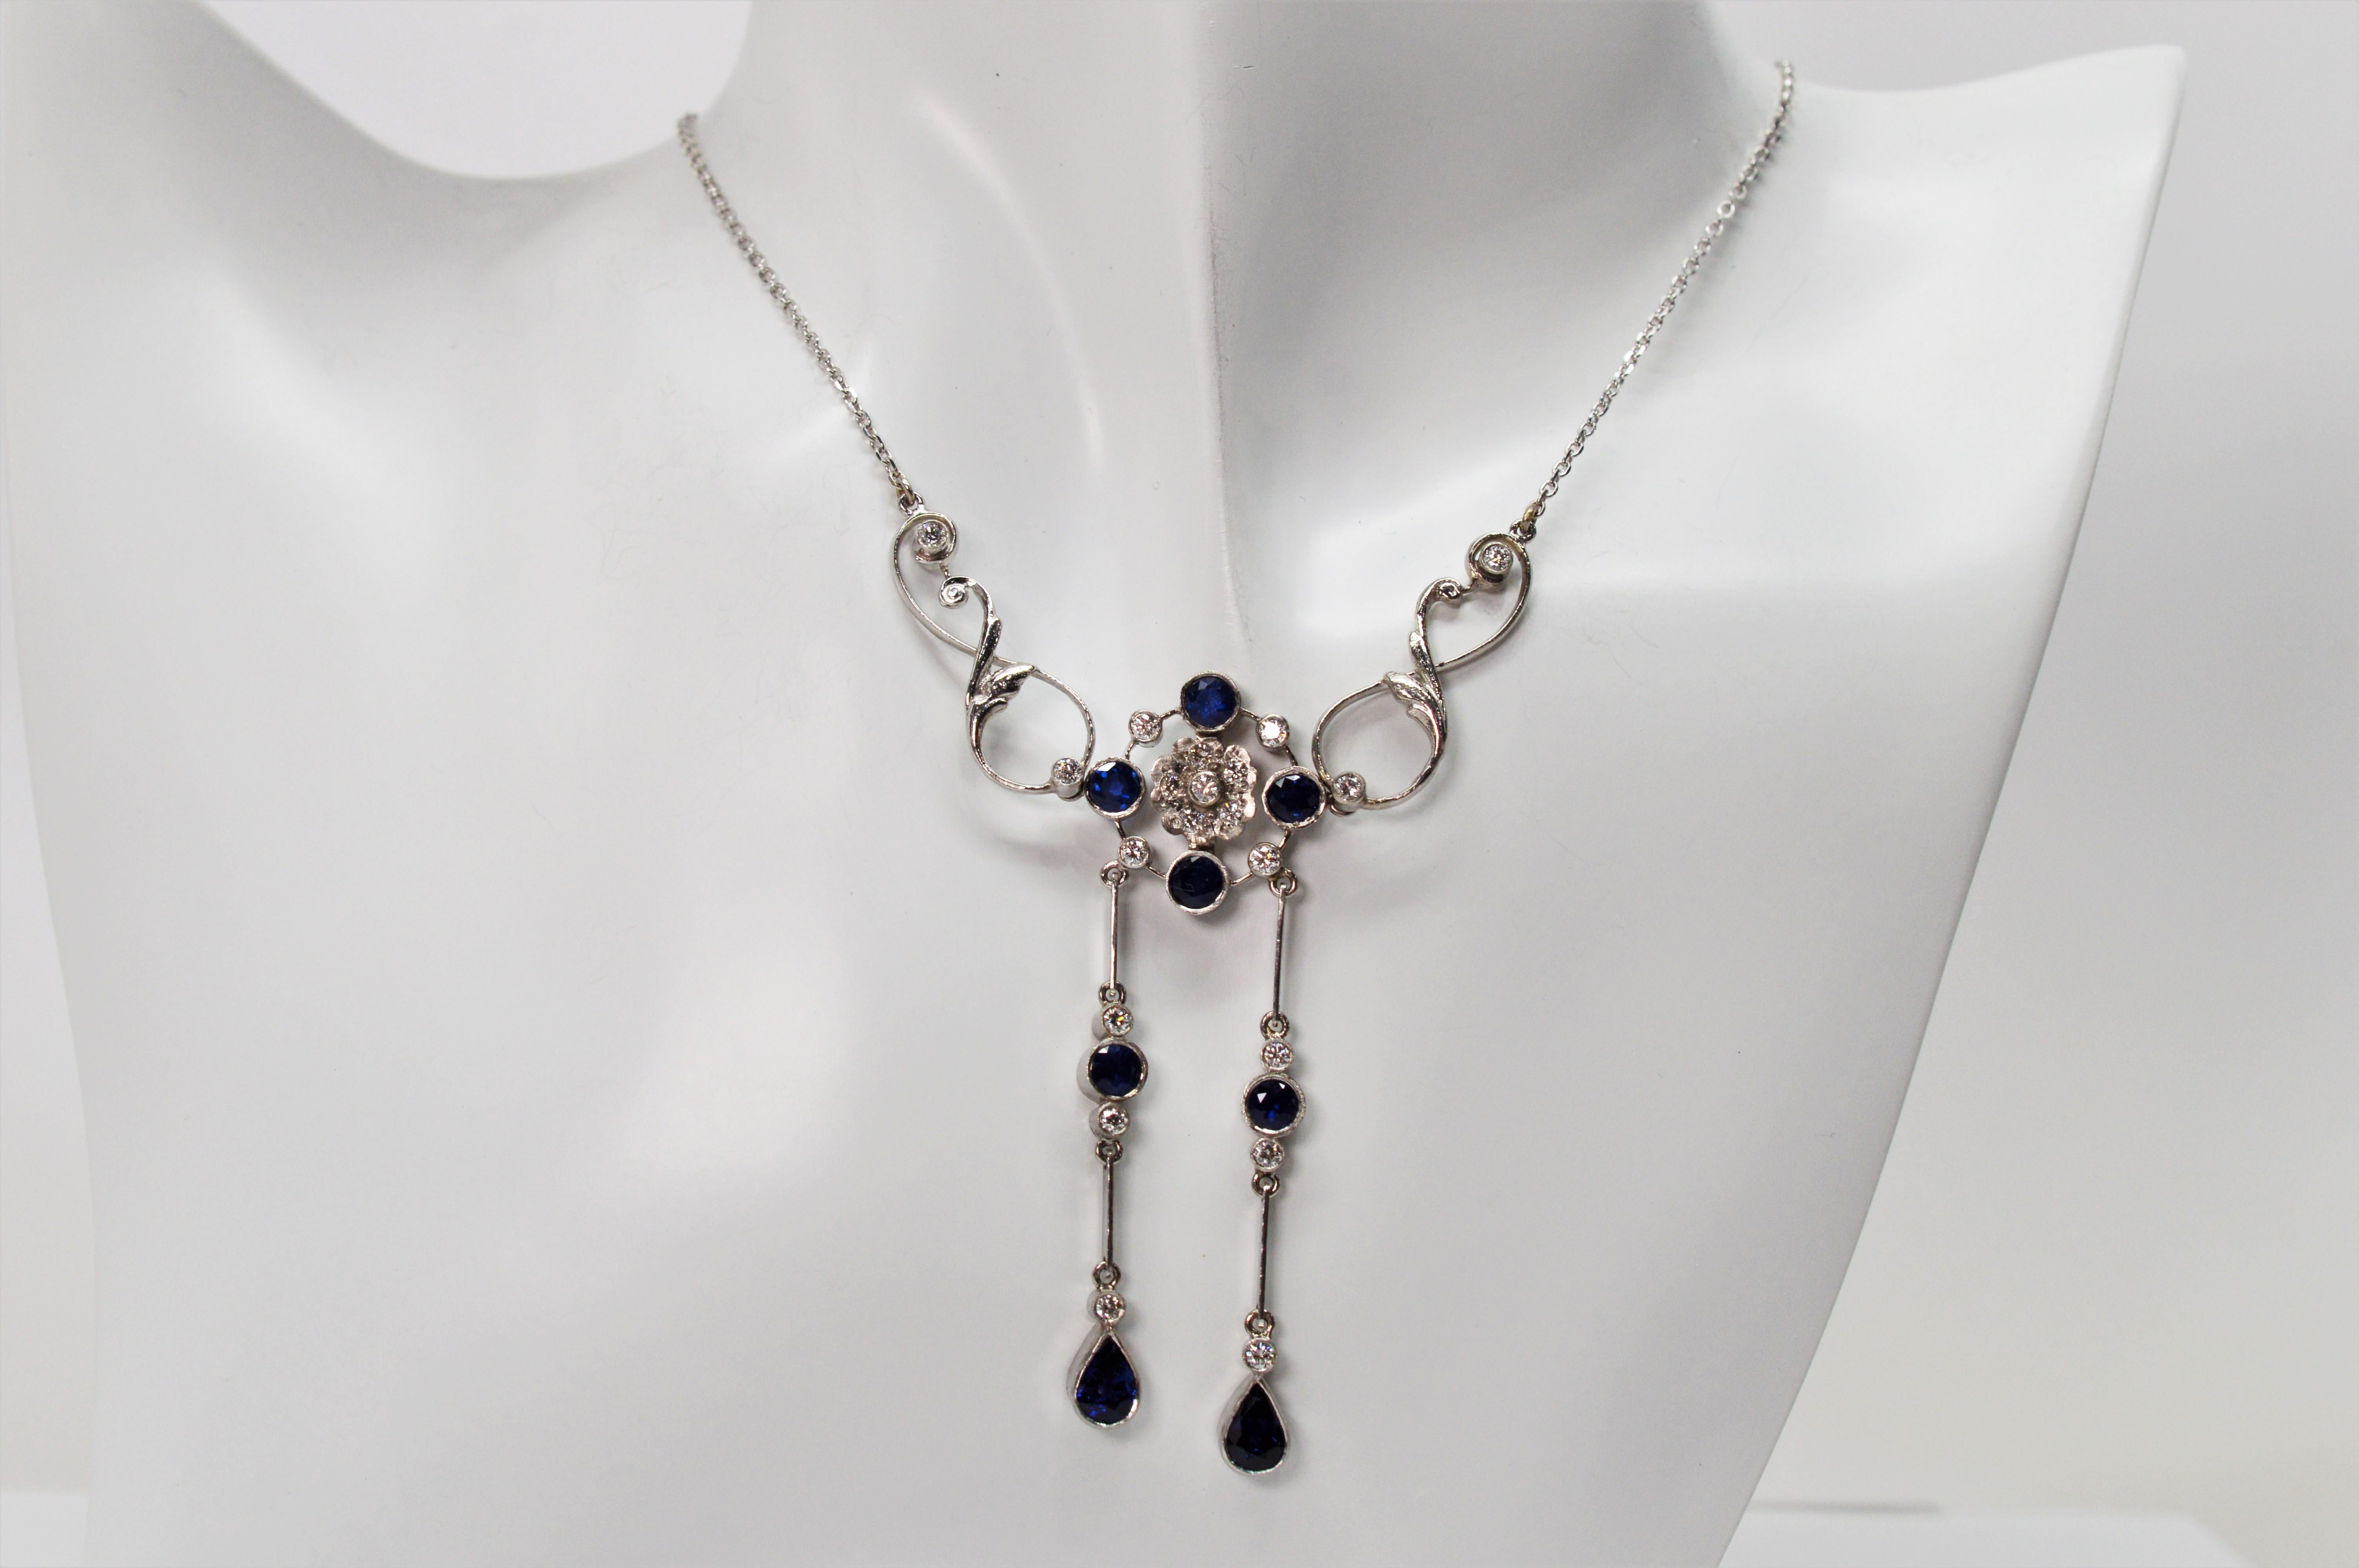 Turn heads with this spectacular blue sapphire and diamond drop pendant necklace in platinum. Perfect as a bridal piece or for that special occasion. The floral pendant centerpiece is crafted with vibrant round blue sapphires that are accent with